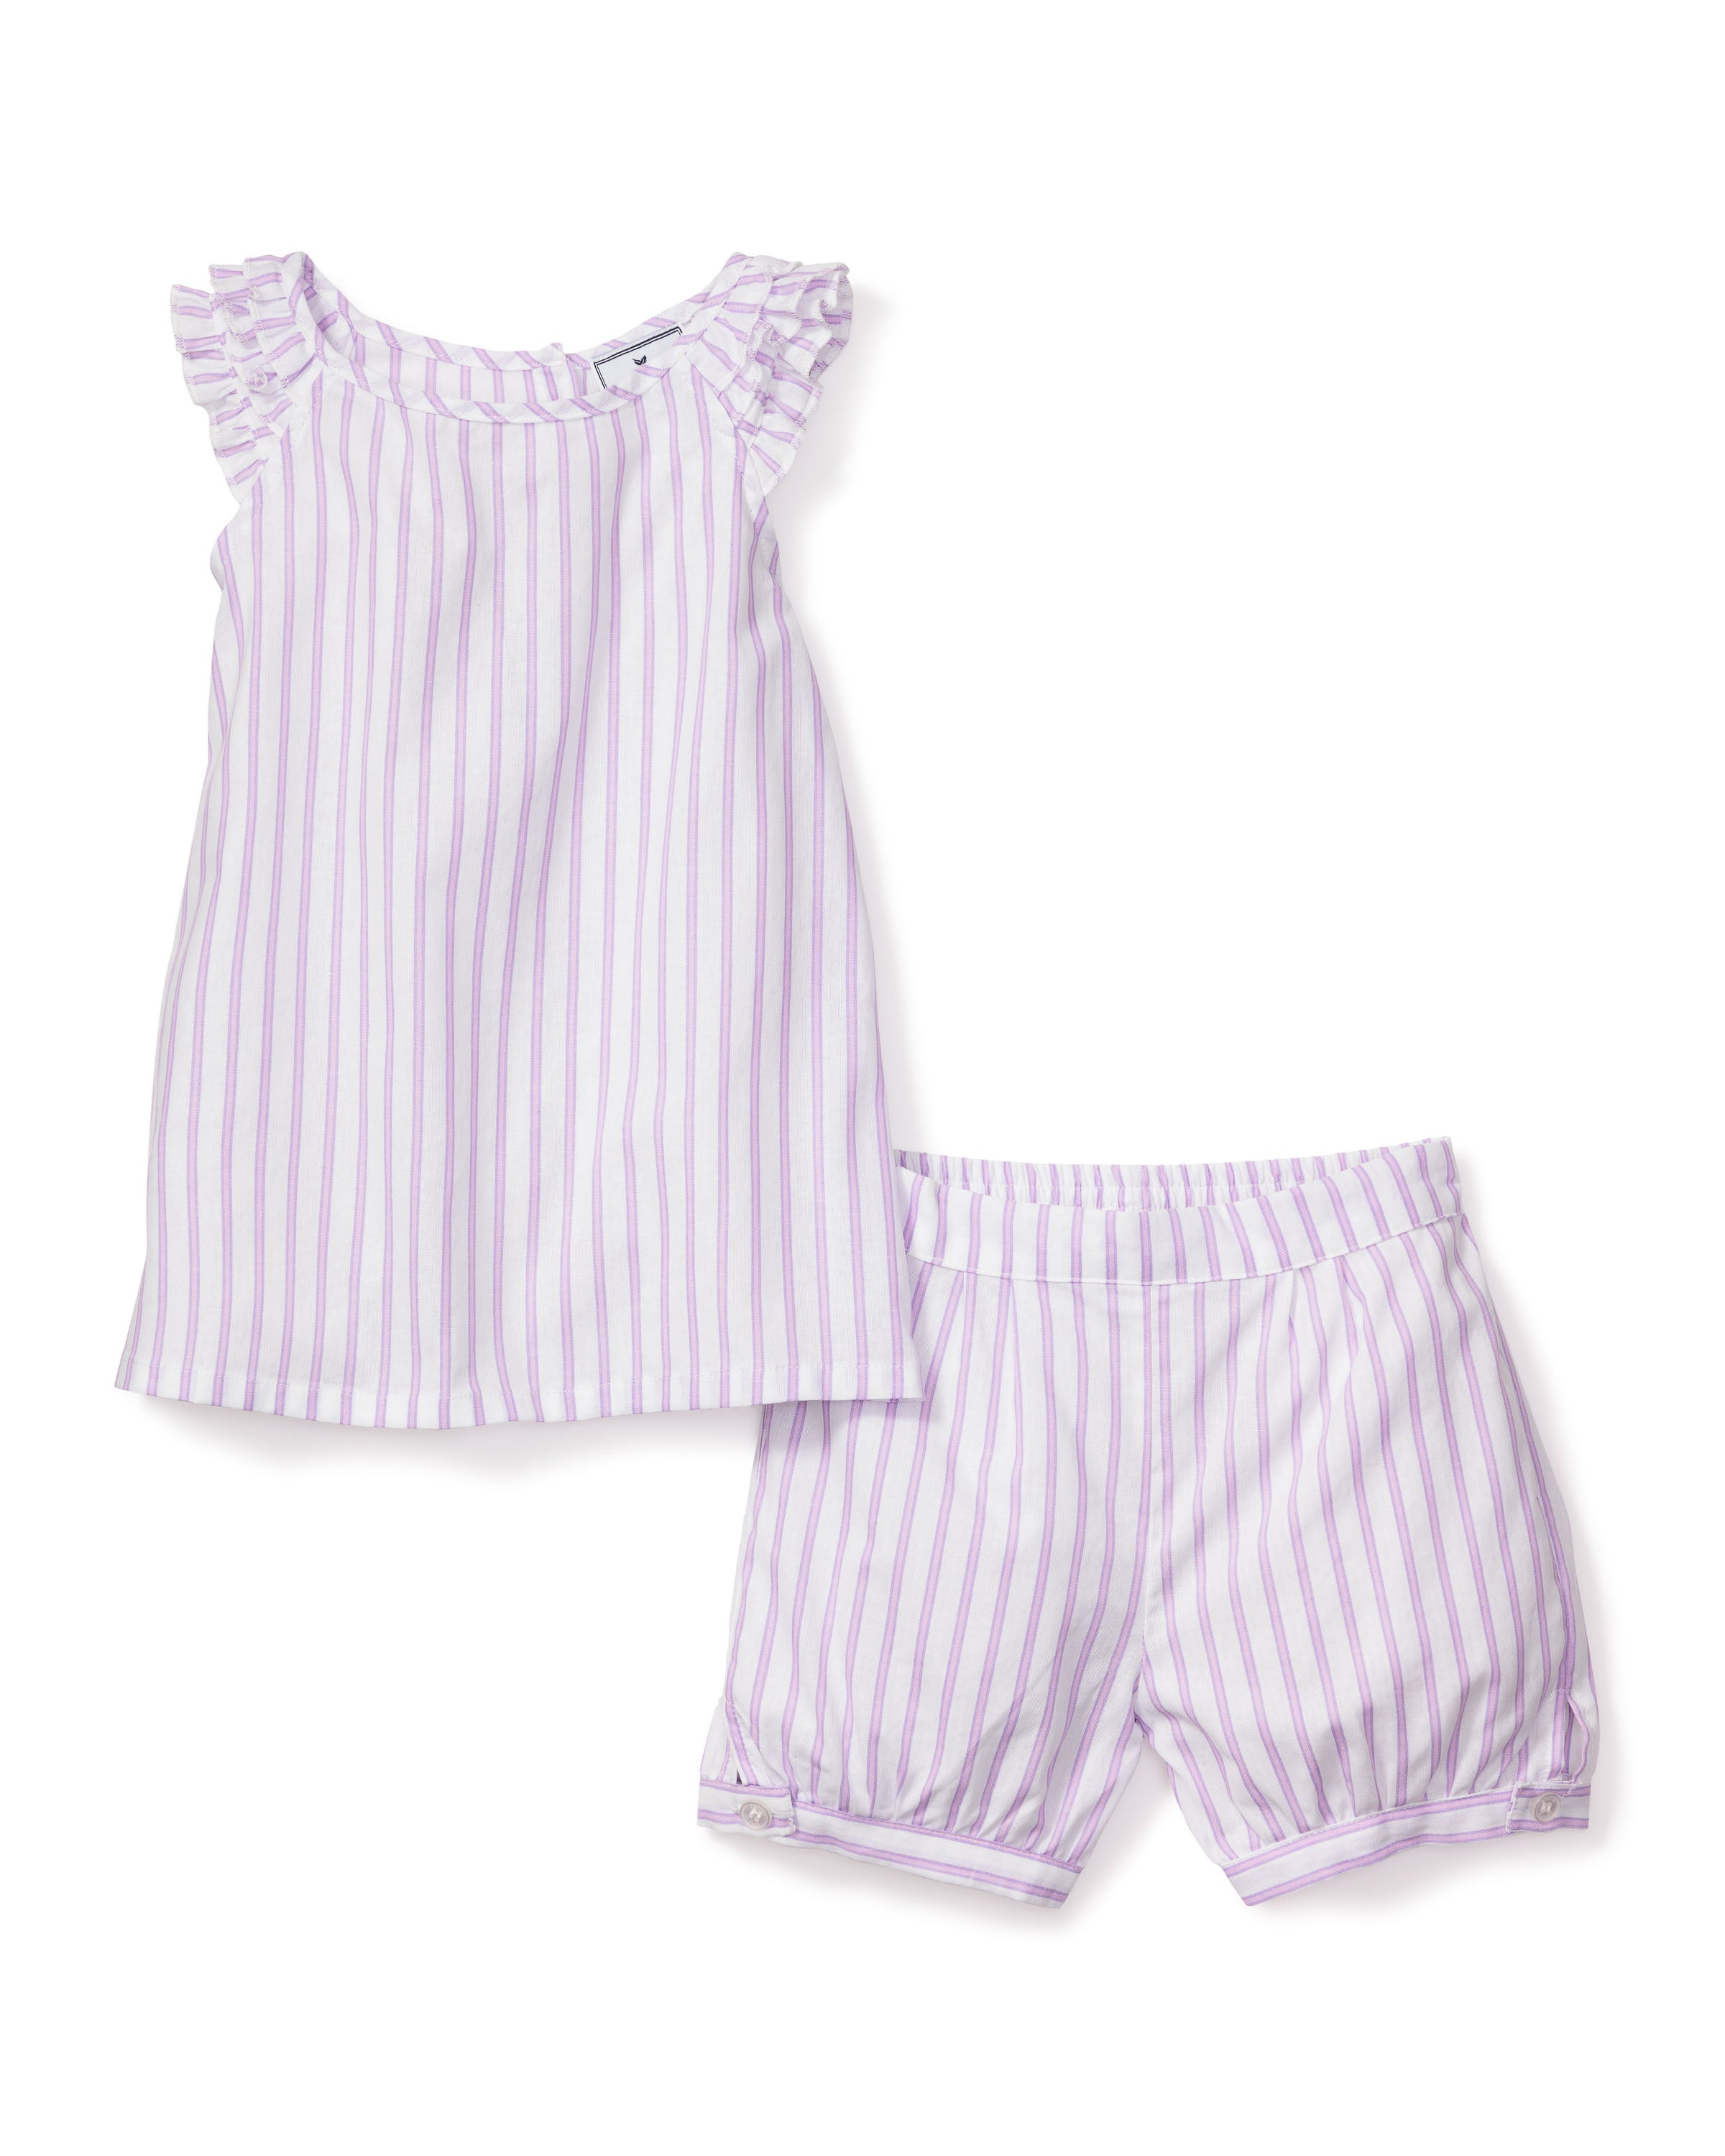 Girl's Twill Amelie Short Set in Lavender French Ticking